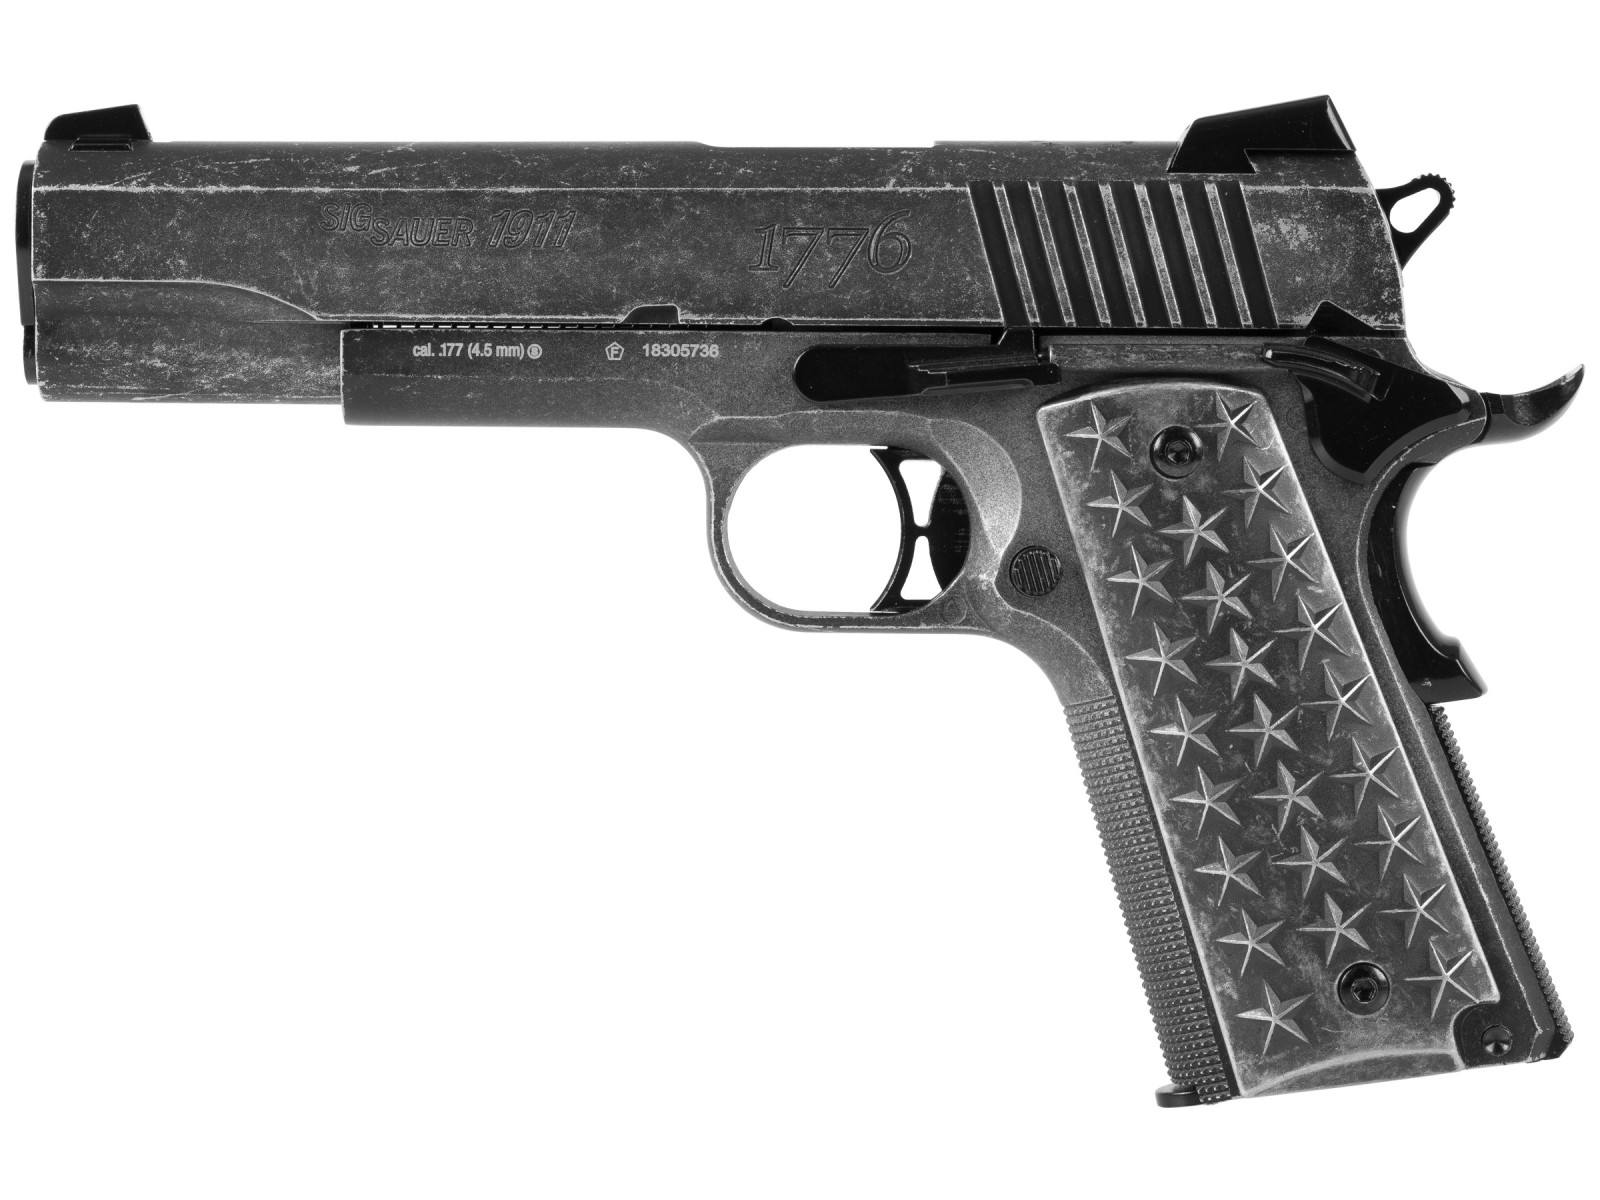 Number #5 Best 1911 BB Pistols - We the People 1911